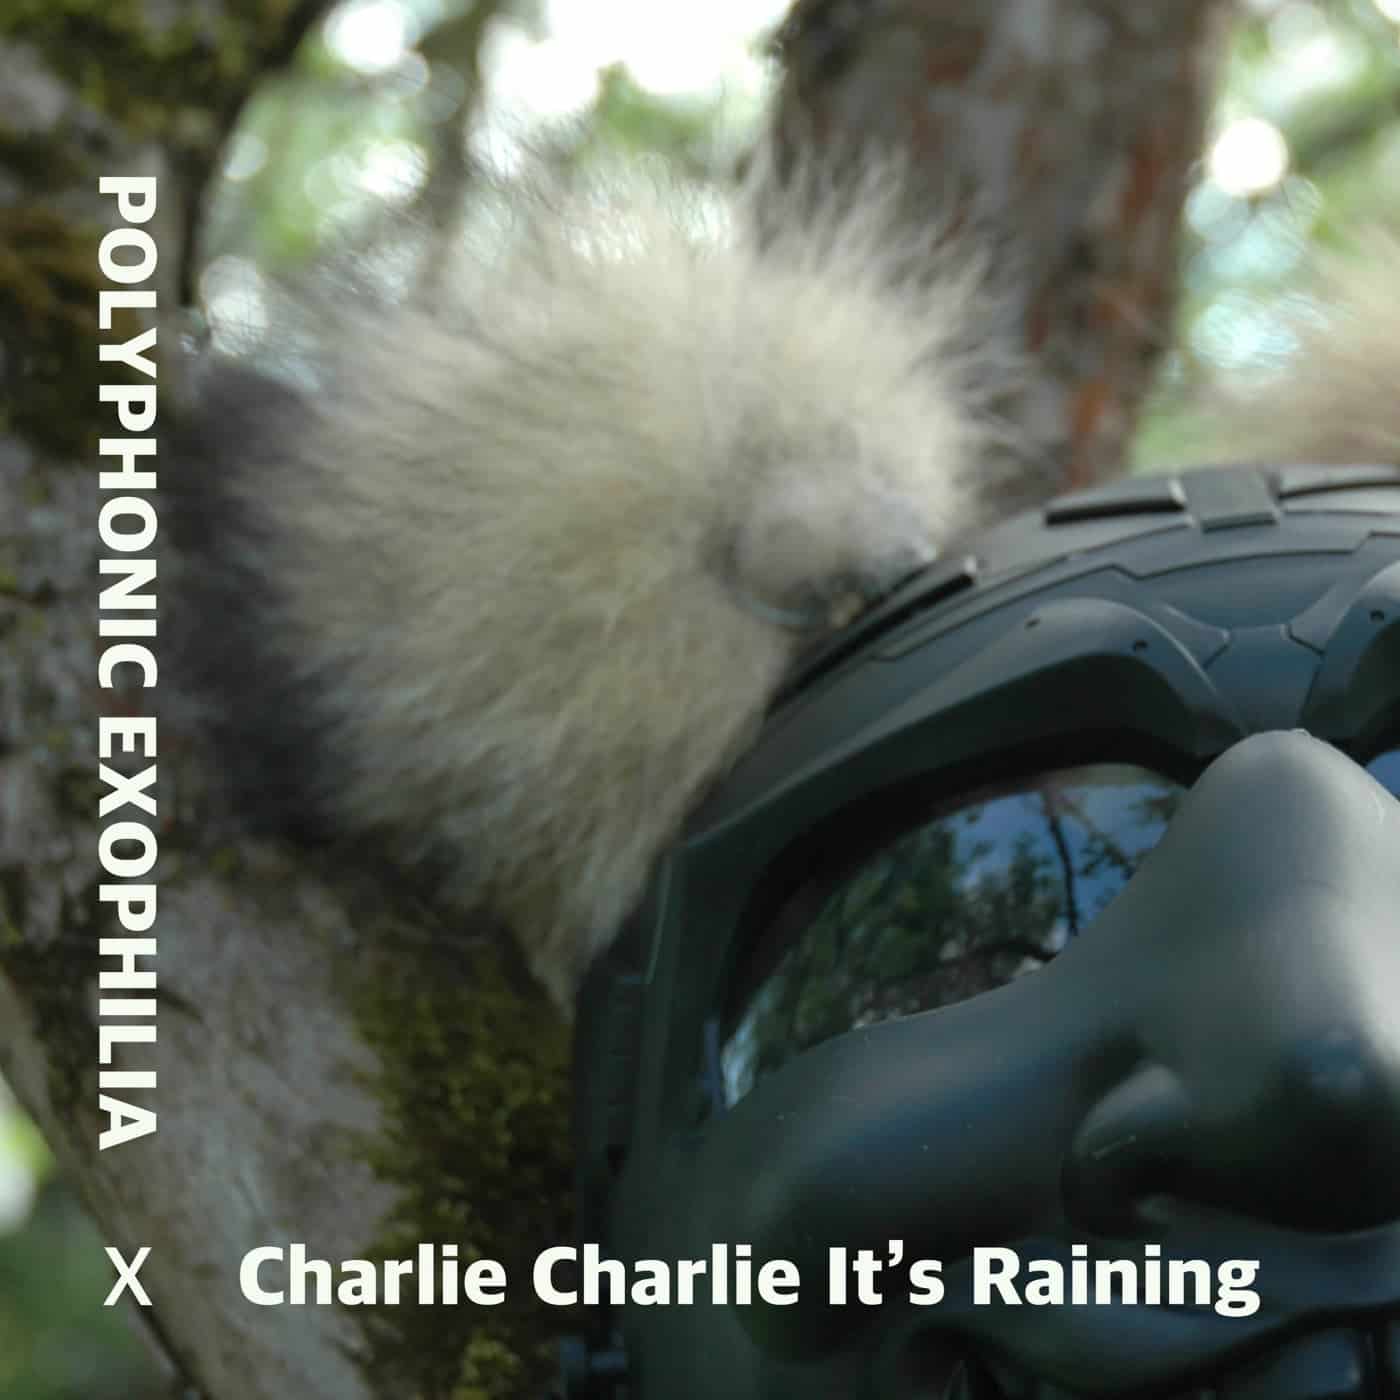 Polyphonic Exophilia & Charlie Charlie It’s raining released great collaboration track